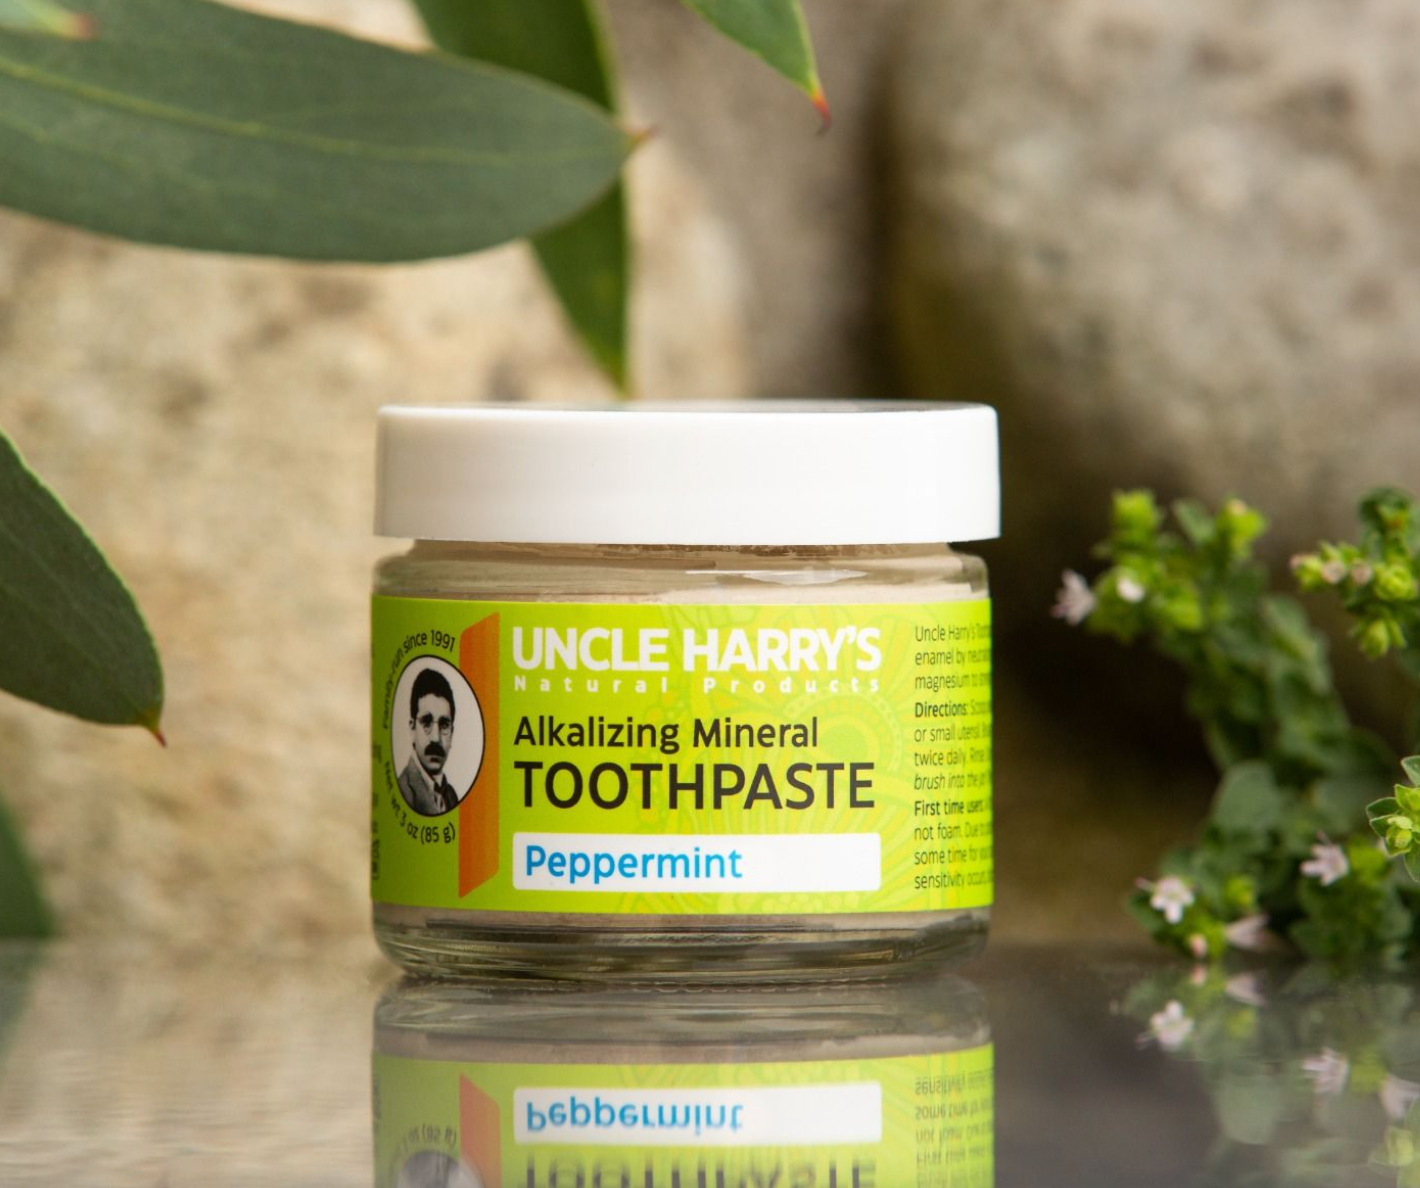 Alkalizing Mineral Toothpaste